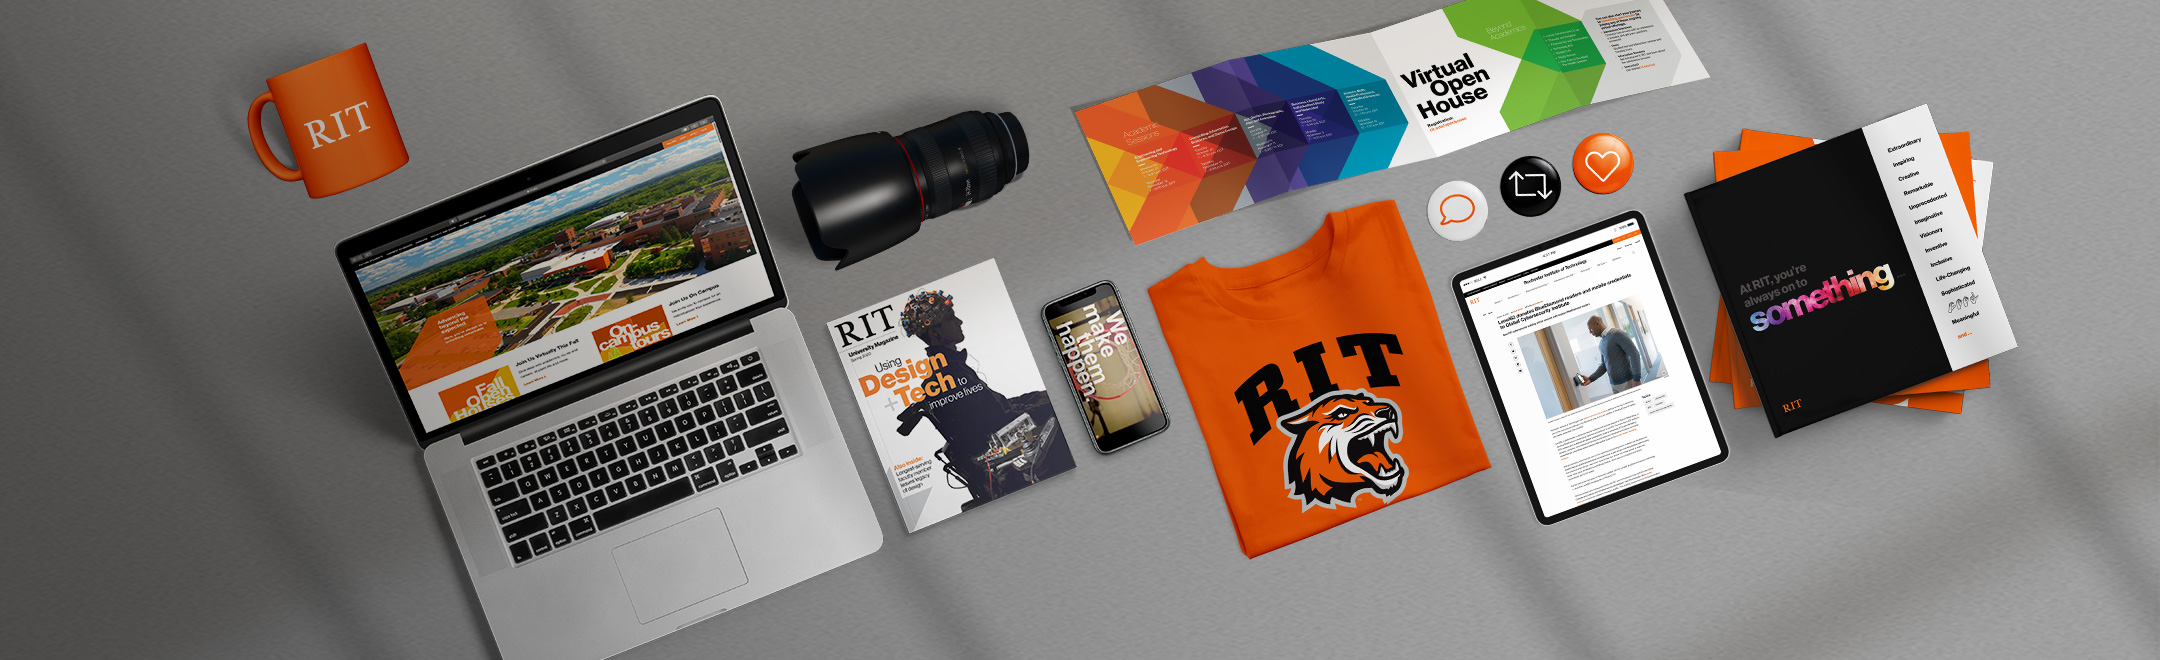 Collage of RIT marketing material on a gray background including a laptop, camera lens, magazine, t-shirt, coffee mug, and notepad